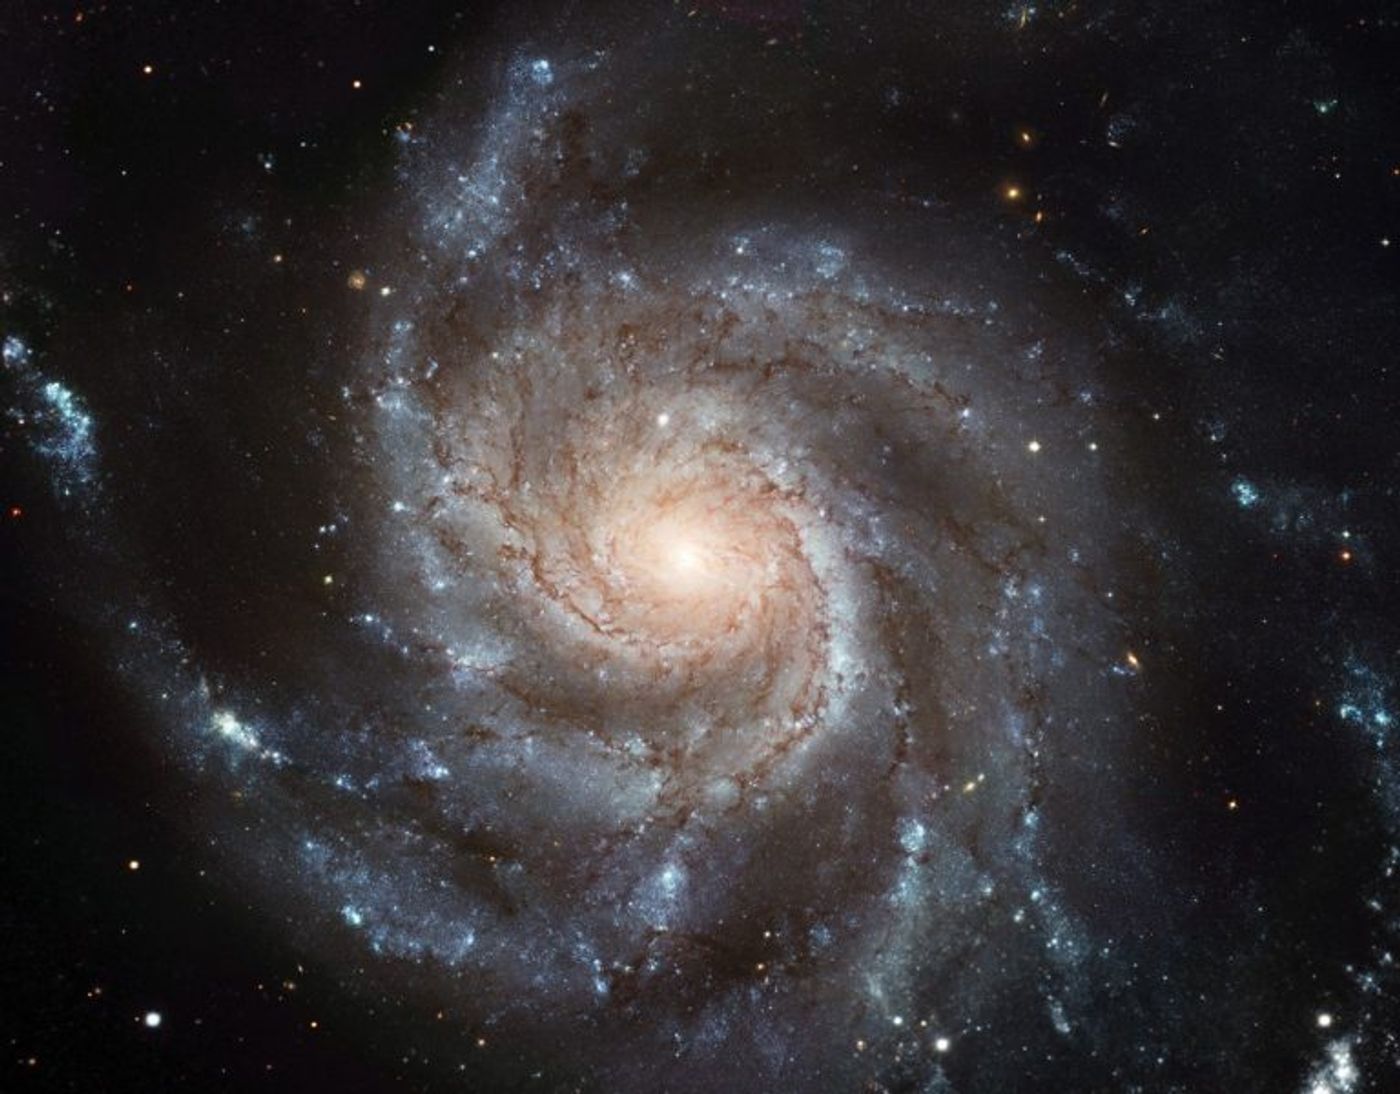 Galaxies like this one, no matter their size, seem to rotate at similar rates.